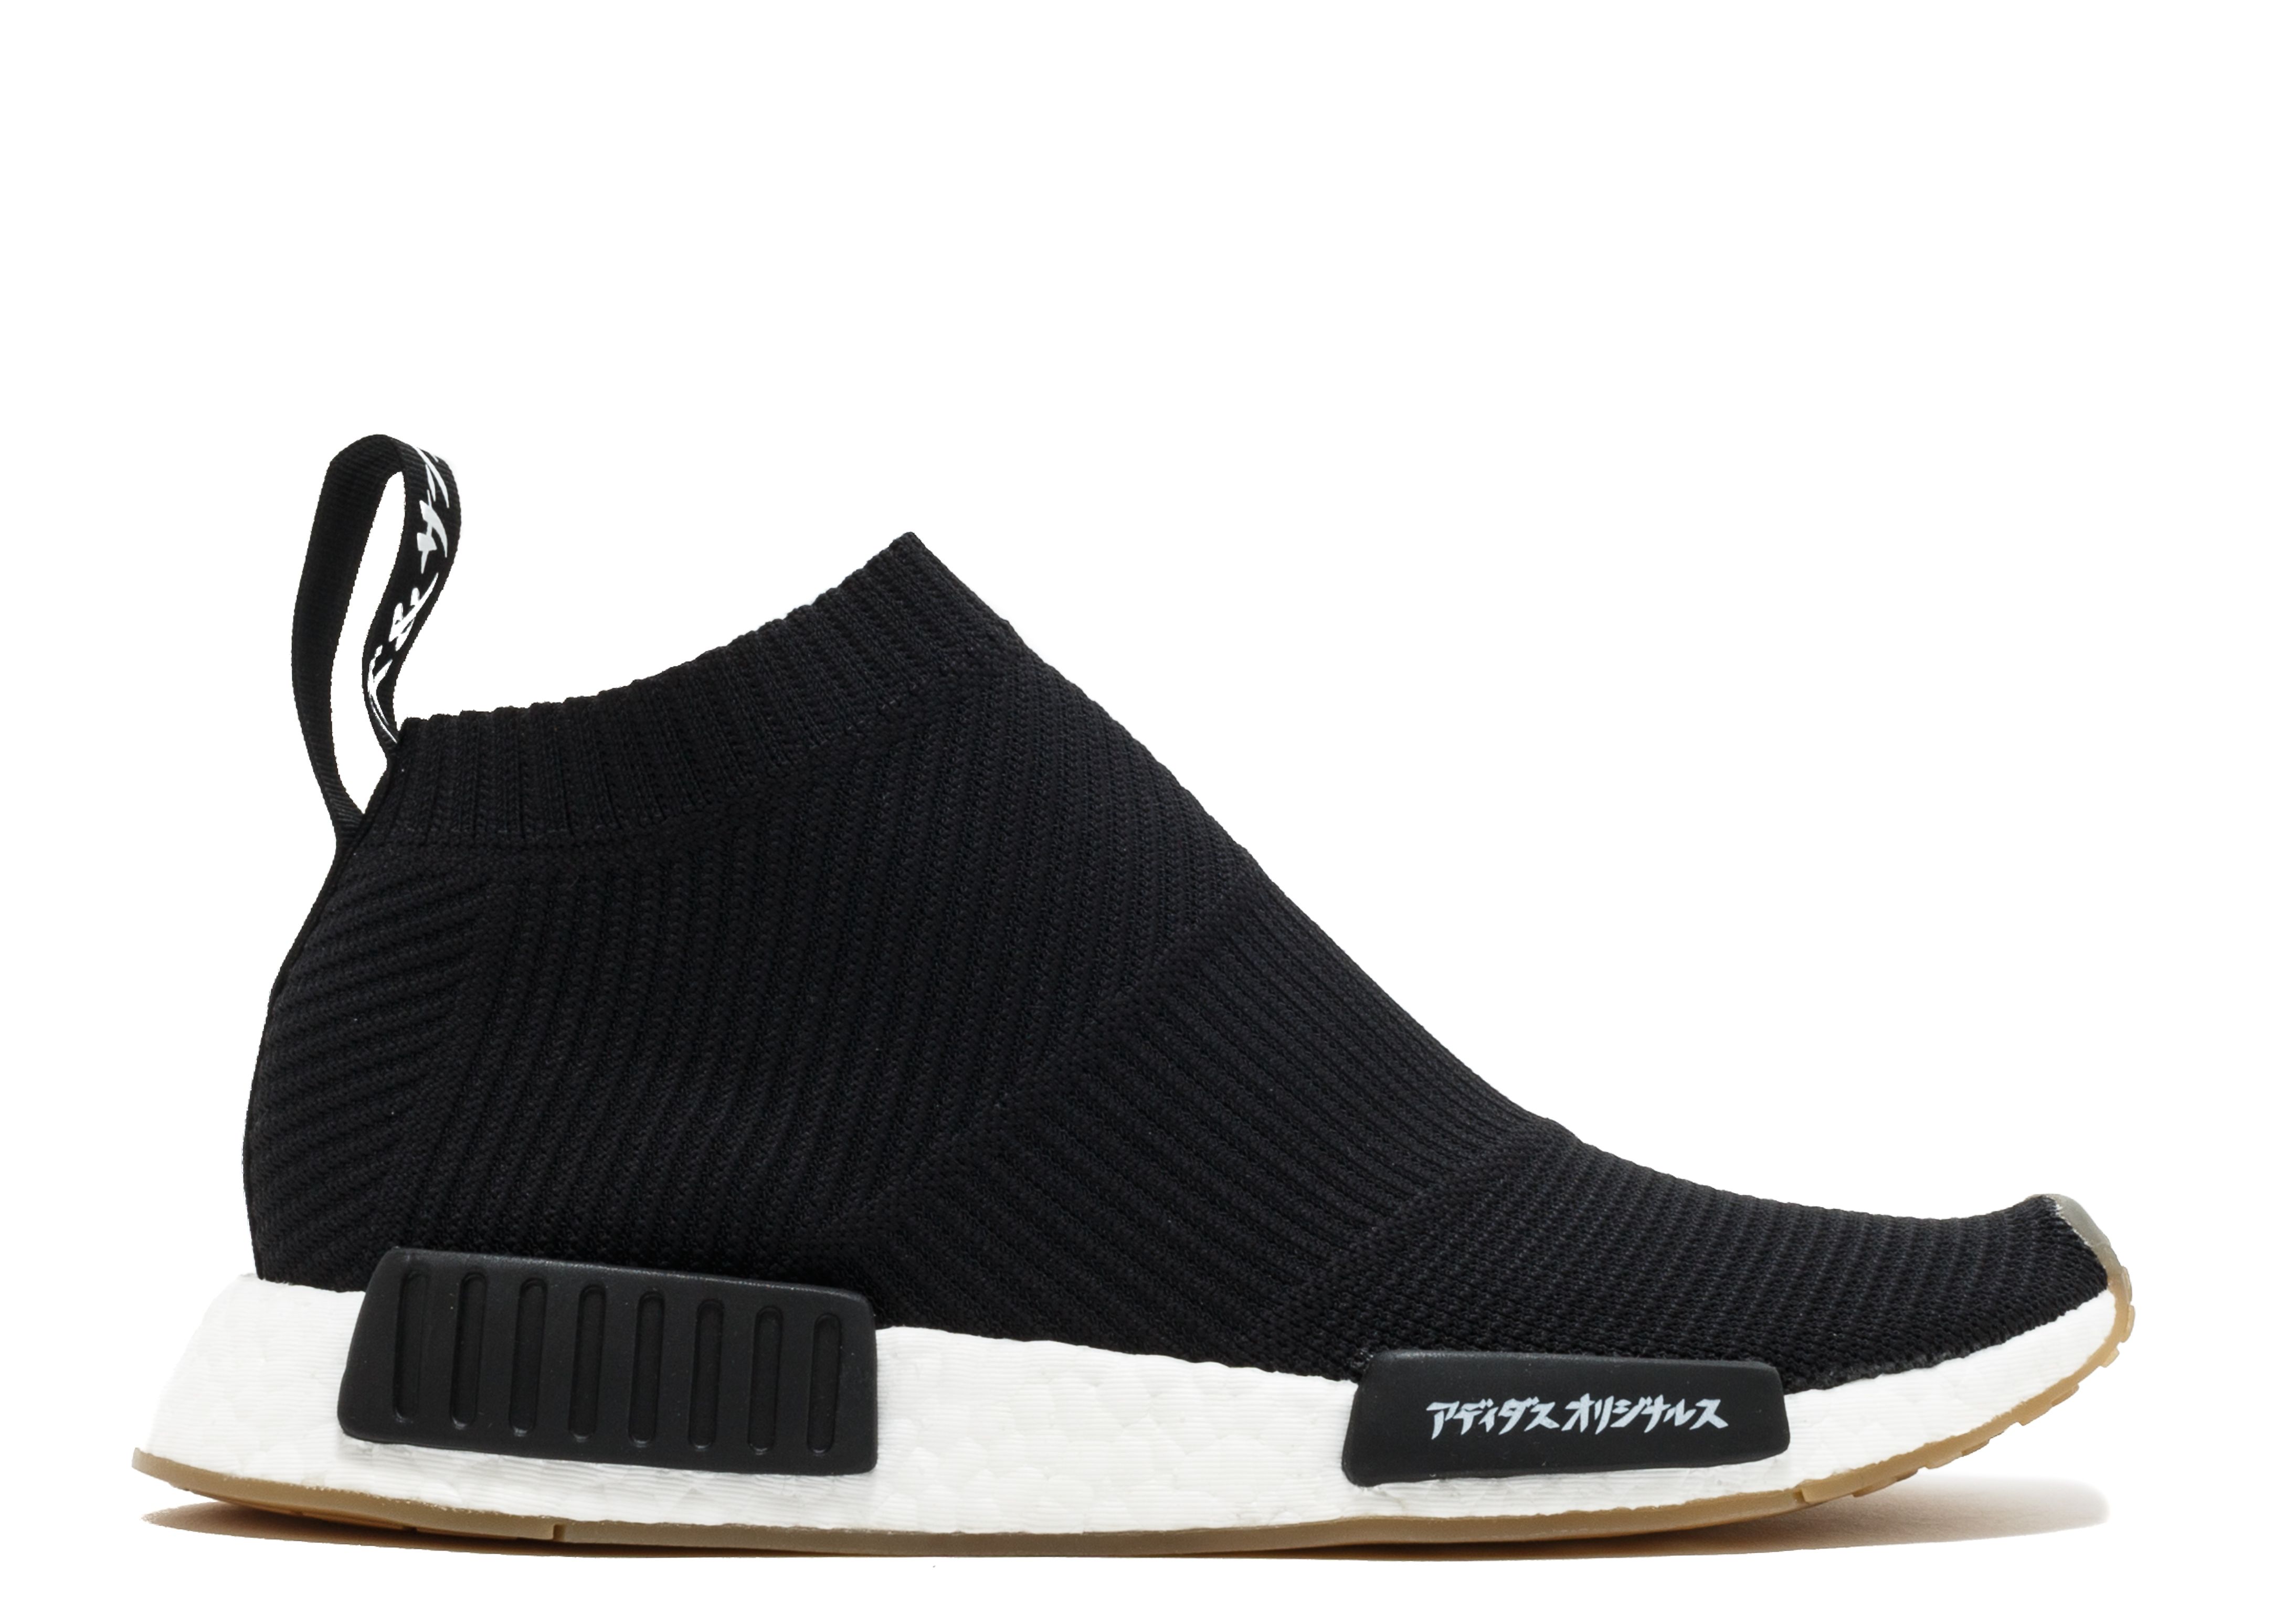 United Arrows And Sons X NMD_CS1 PK 